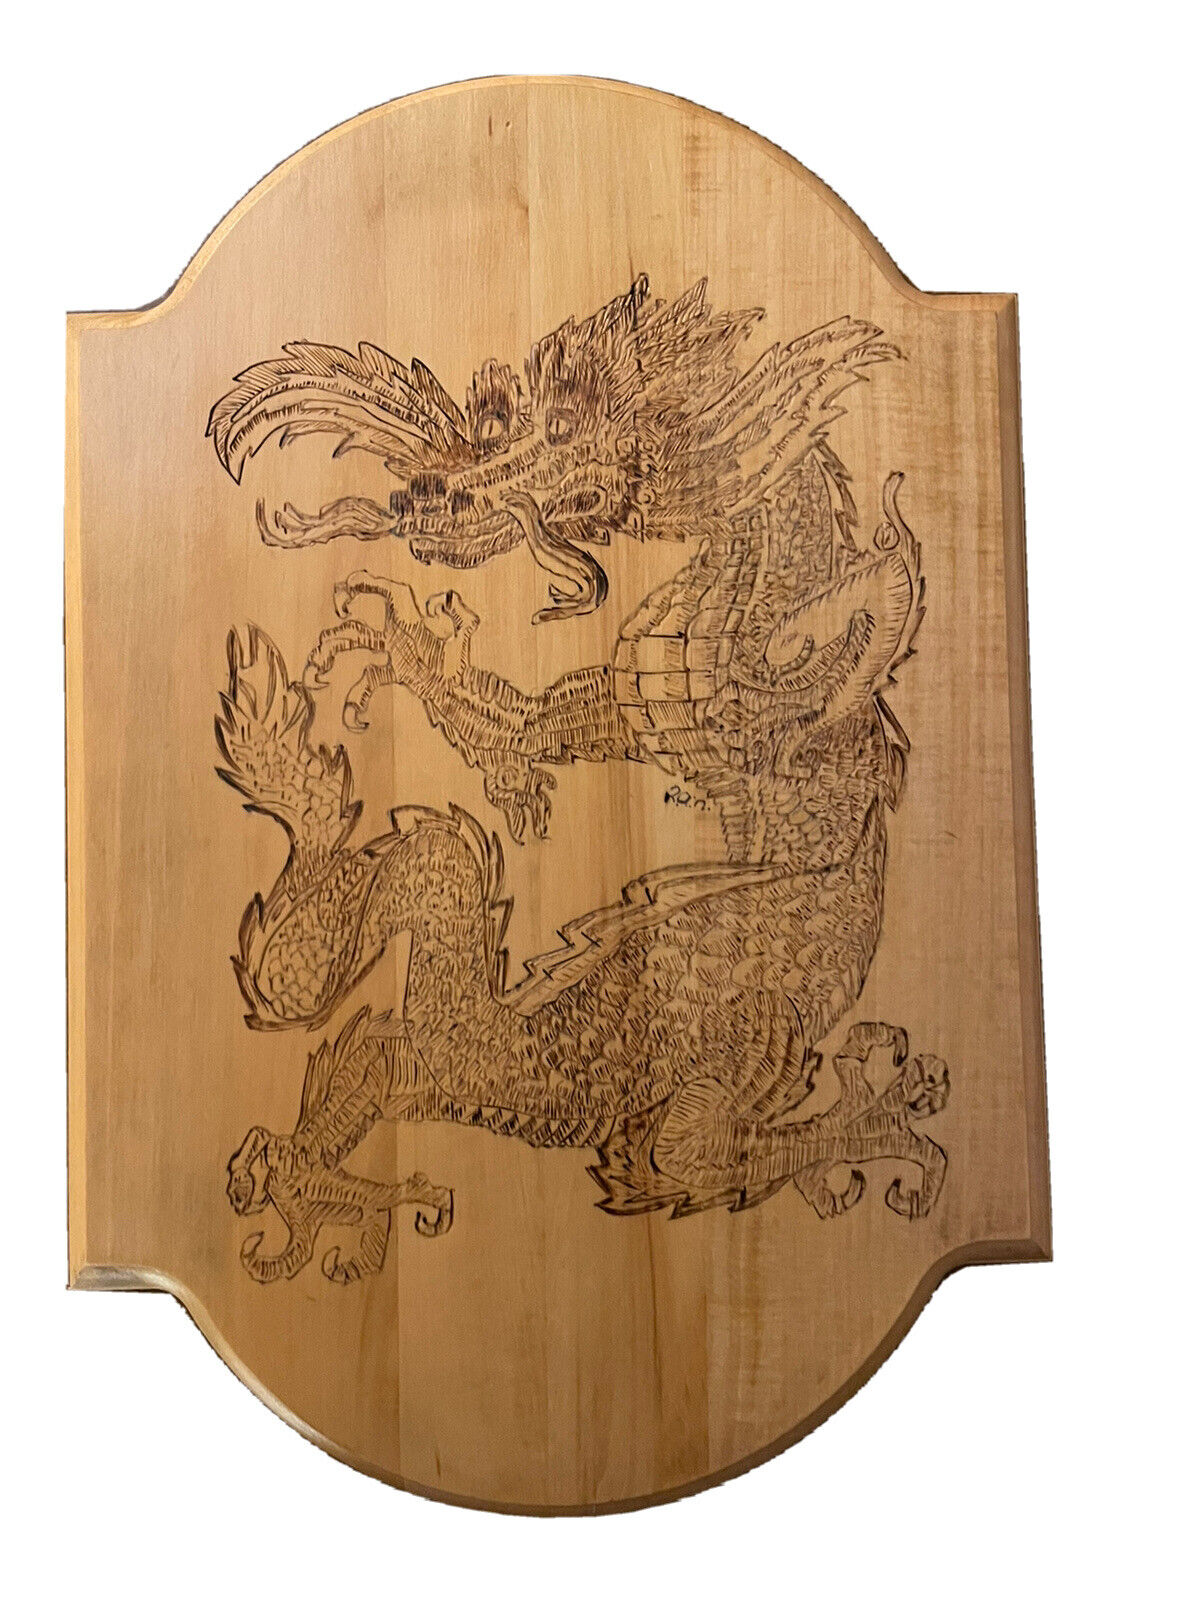 Wooden Dragon Plaque , signed, approx 14 inches by 9.5 inches